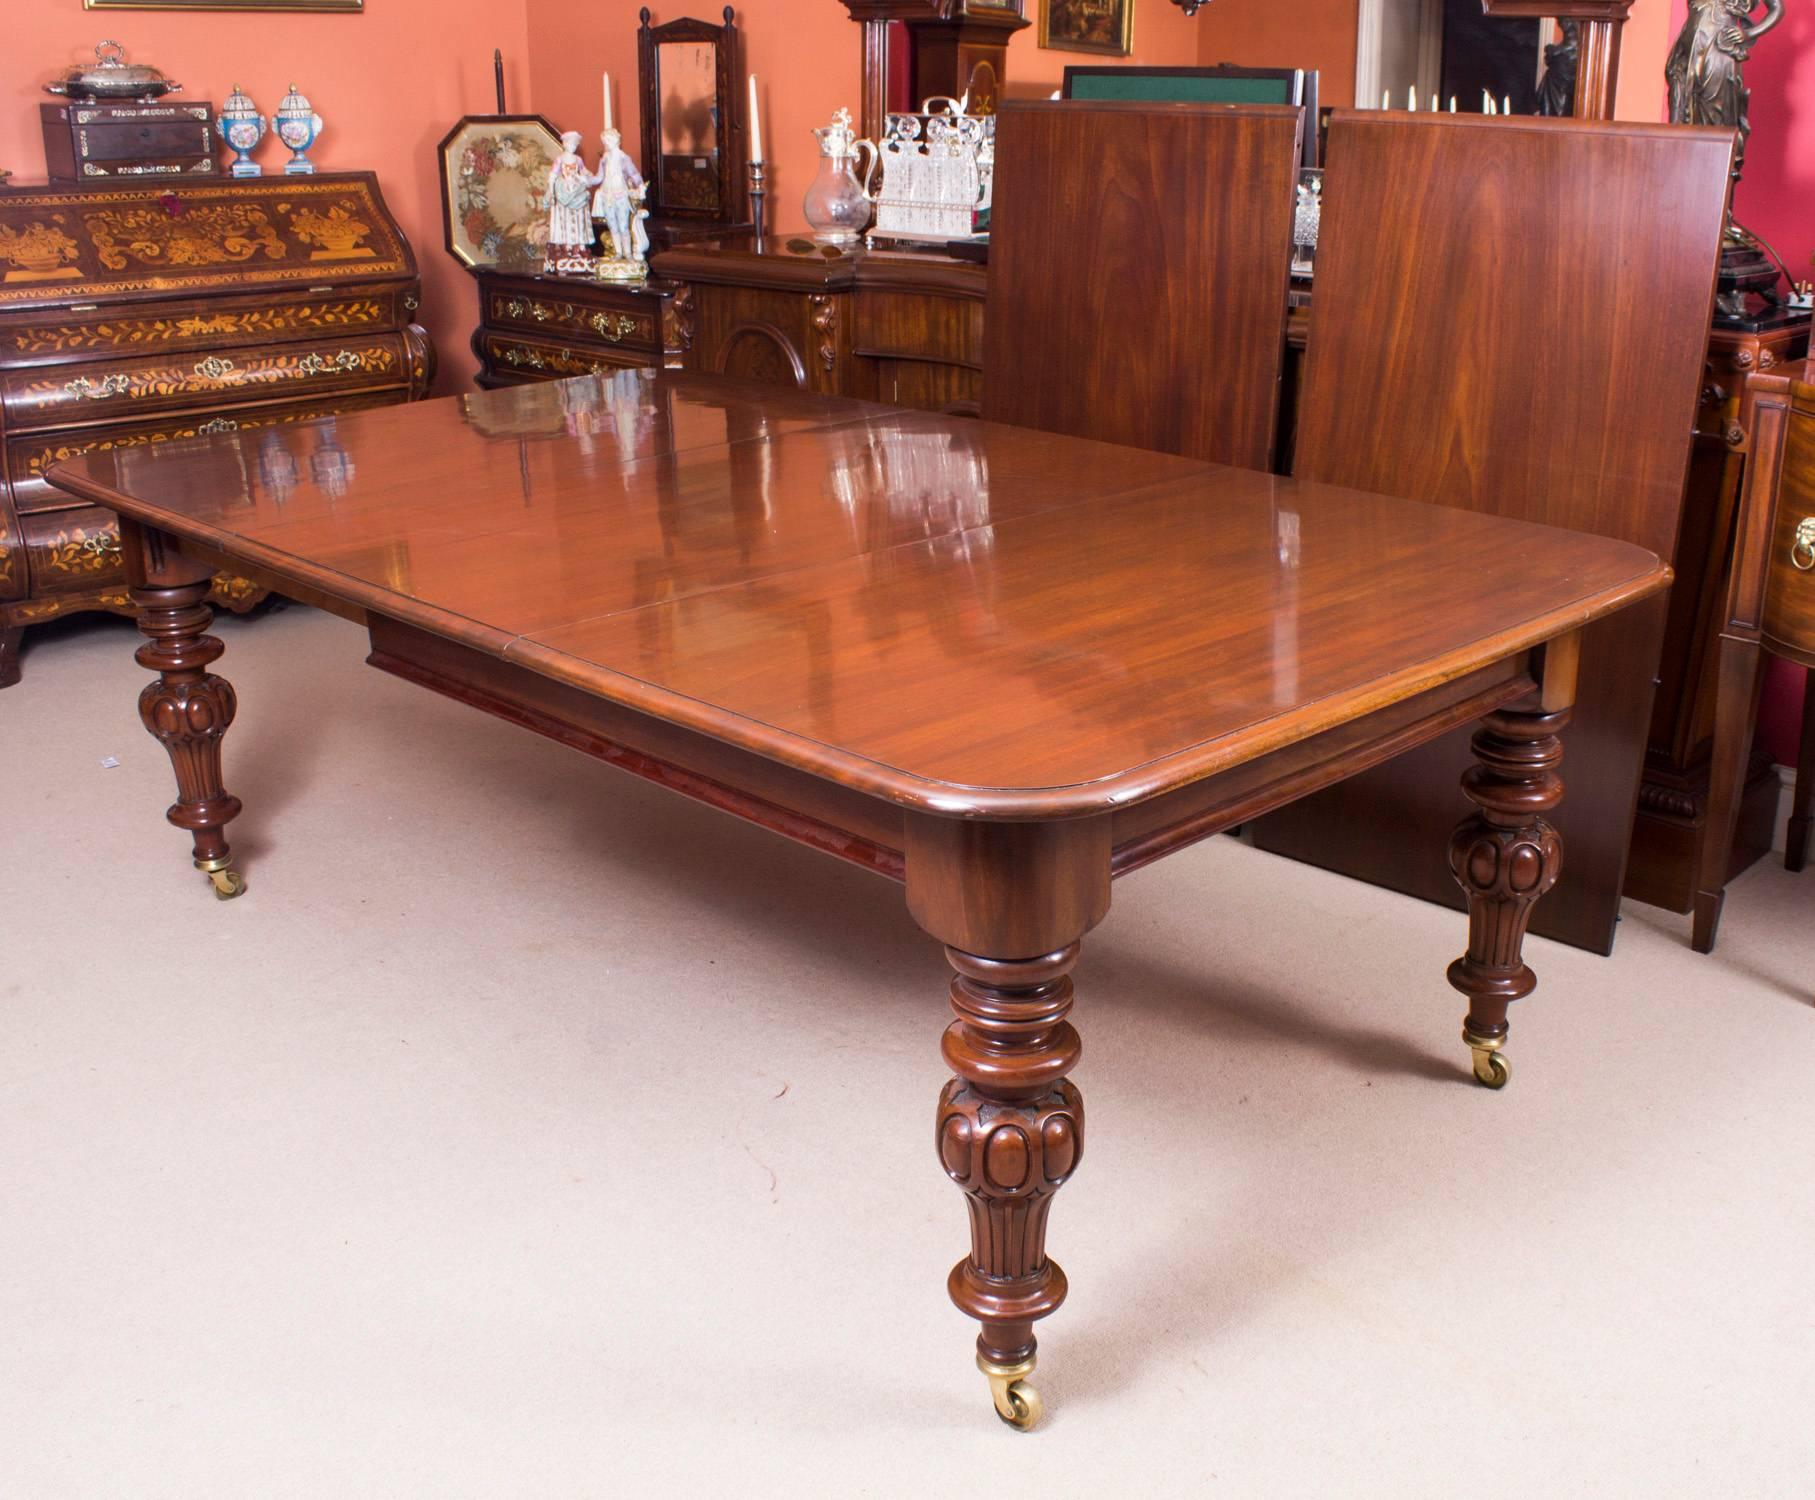 12 foot dining table